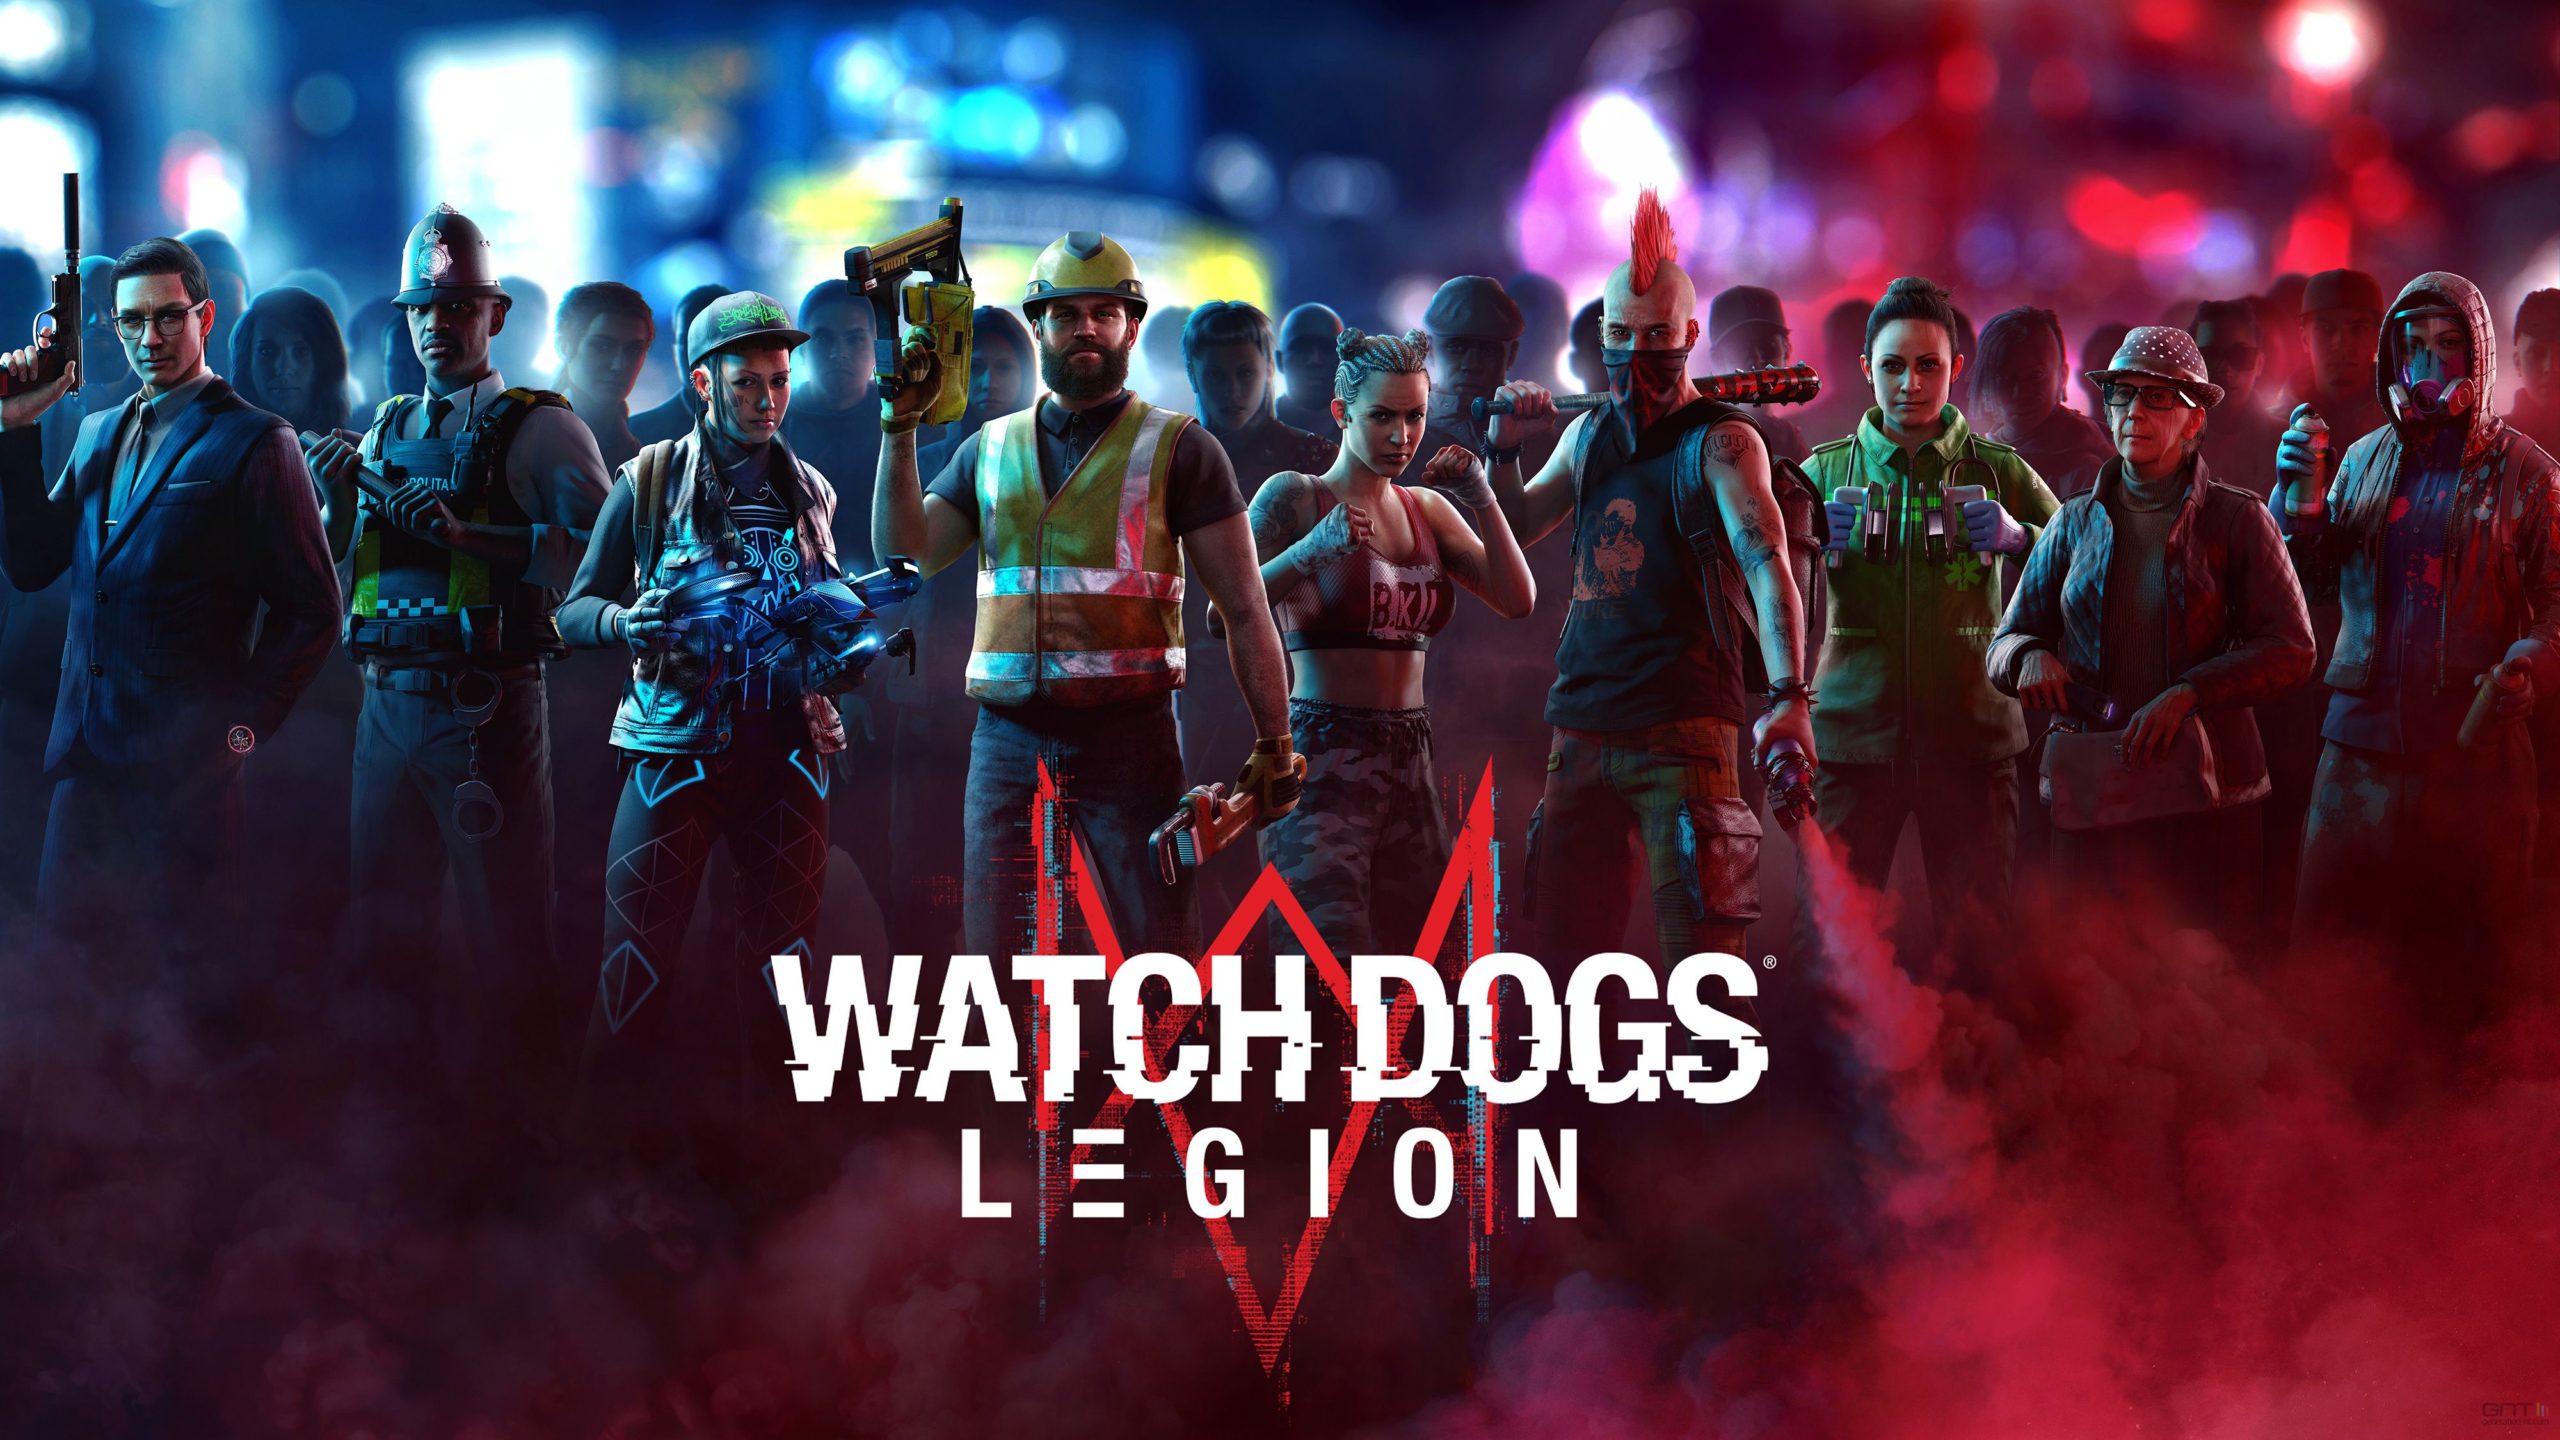 Download WATCH DOGS LEGION-EMPRESS + Crack only